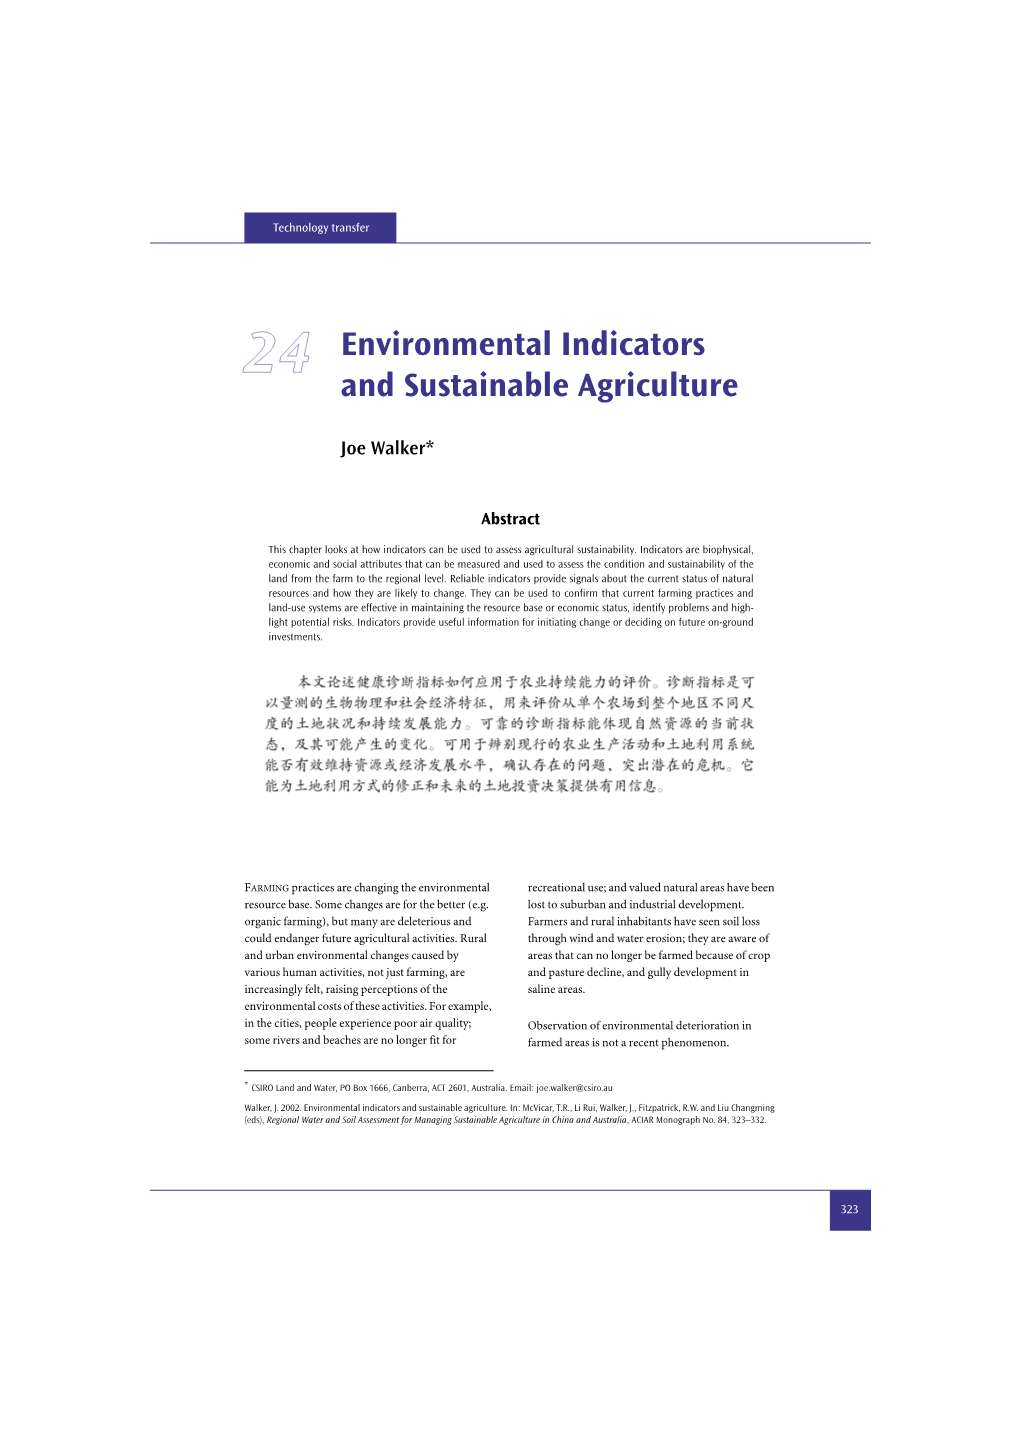 Environmental Indicators and Sustainable Agriculture